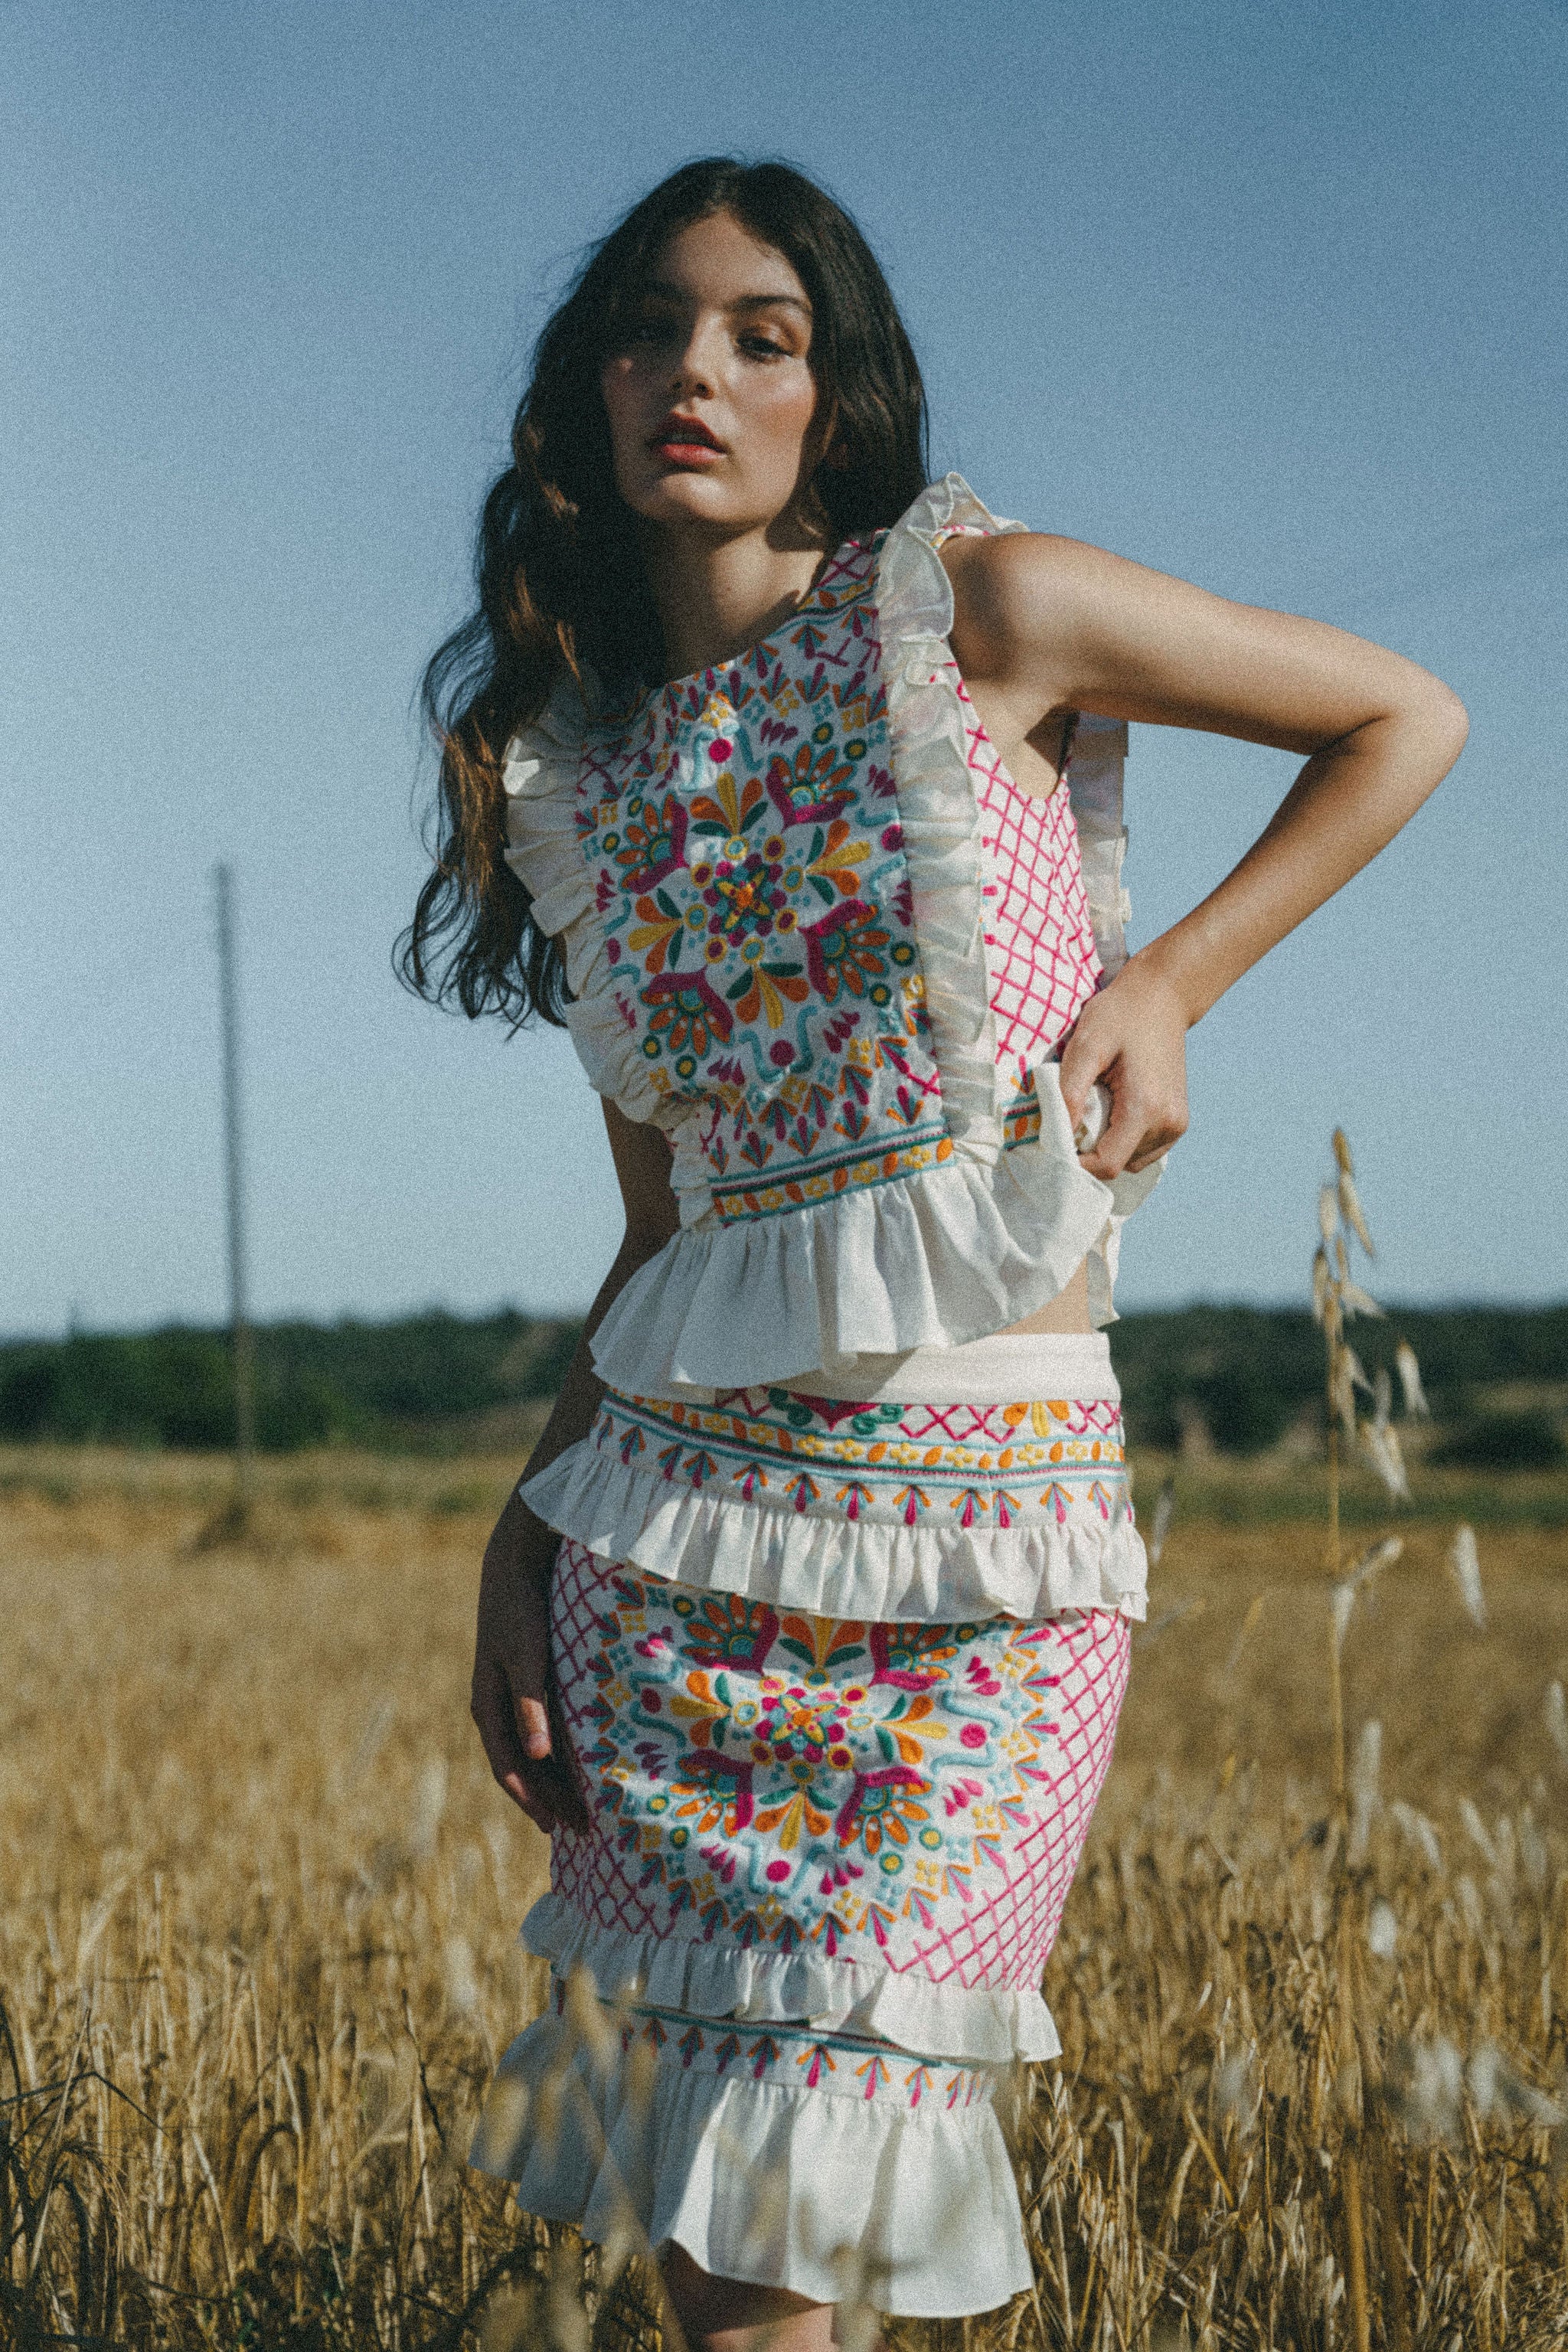 girl in field wearing embroidered top and skirt